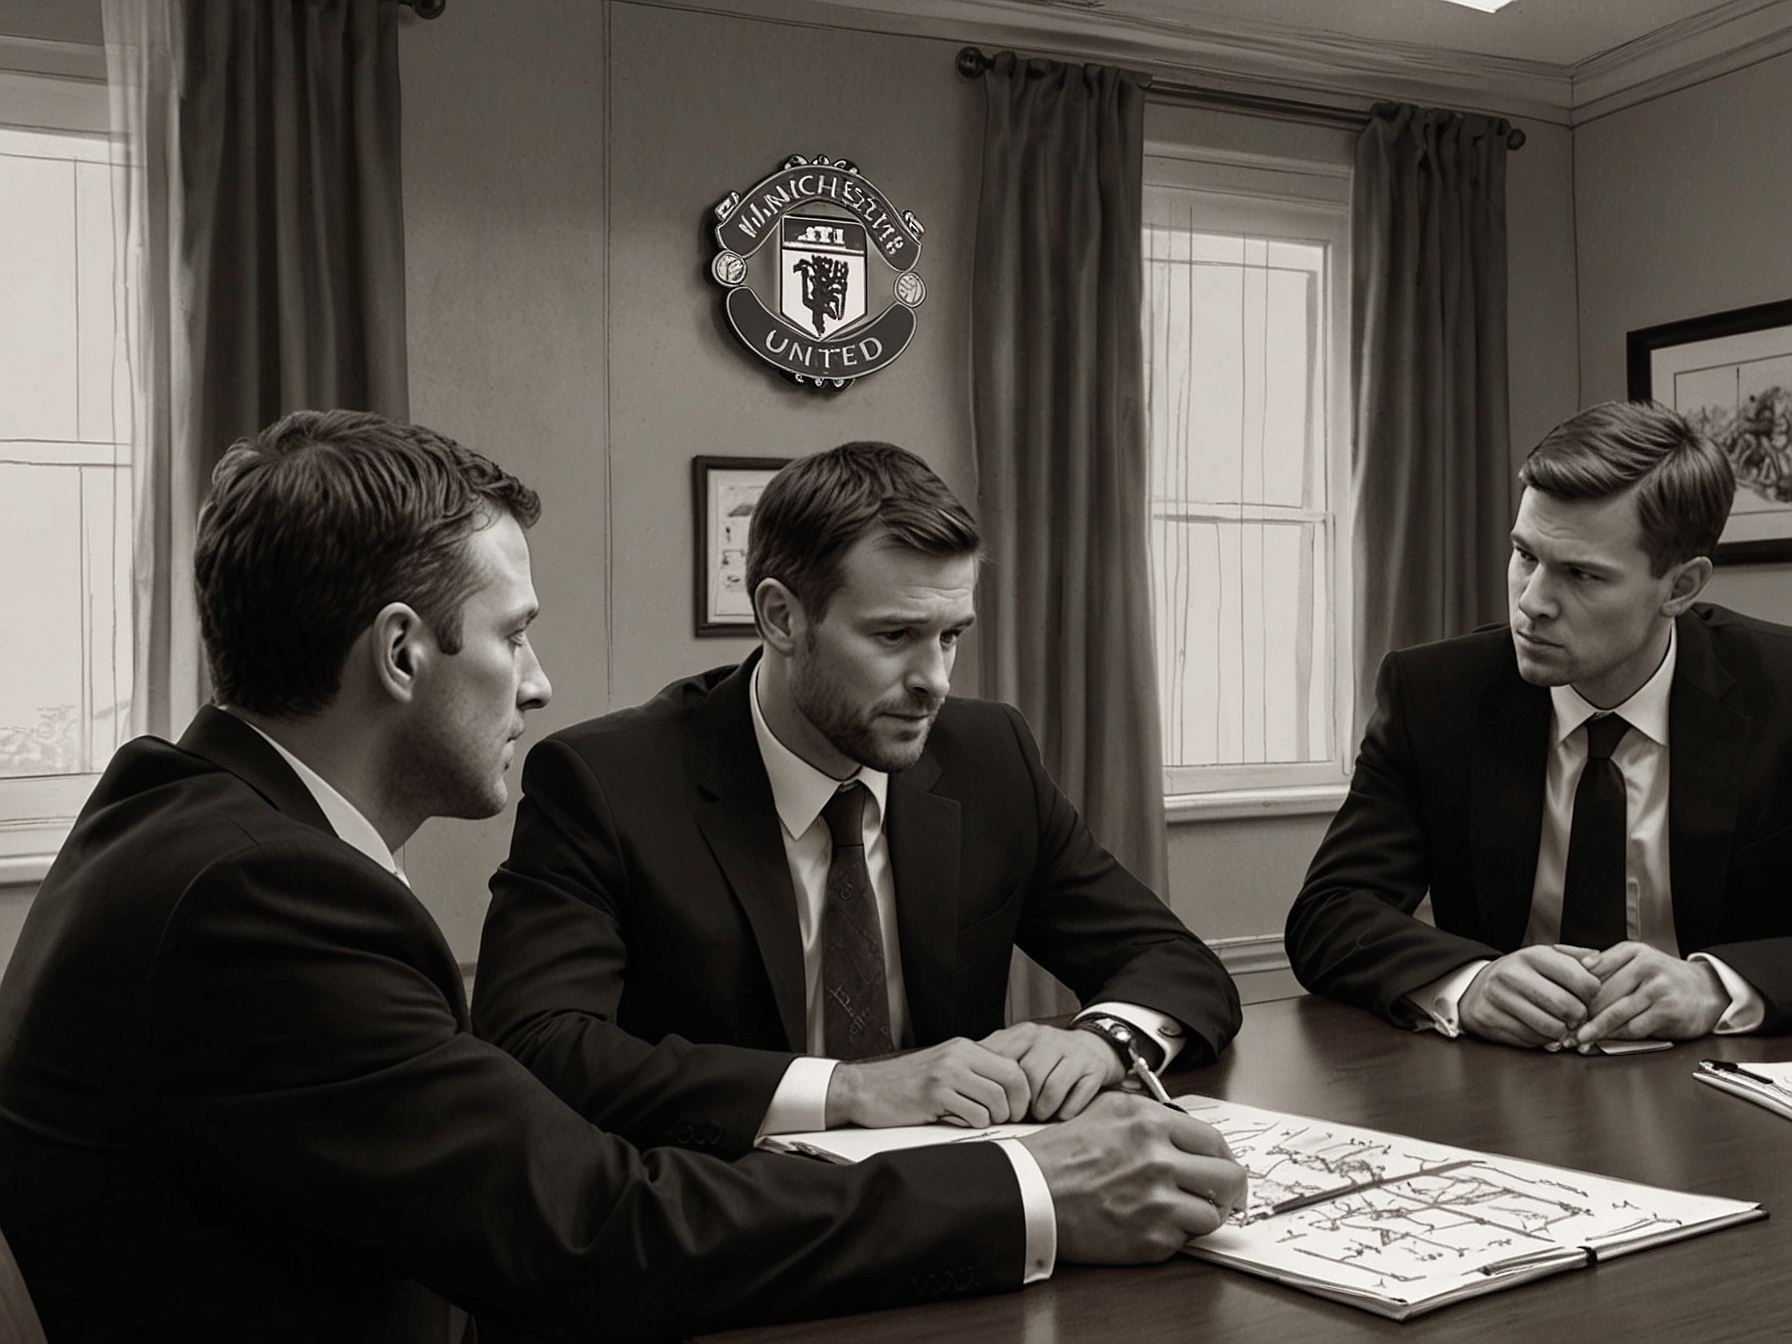 An image showing Manchester United representatives in deep discussion at a transfer meeting, symbolizing the complex and competitive negotiations for Jarrad Branthwaite.